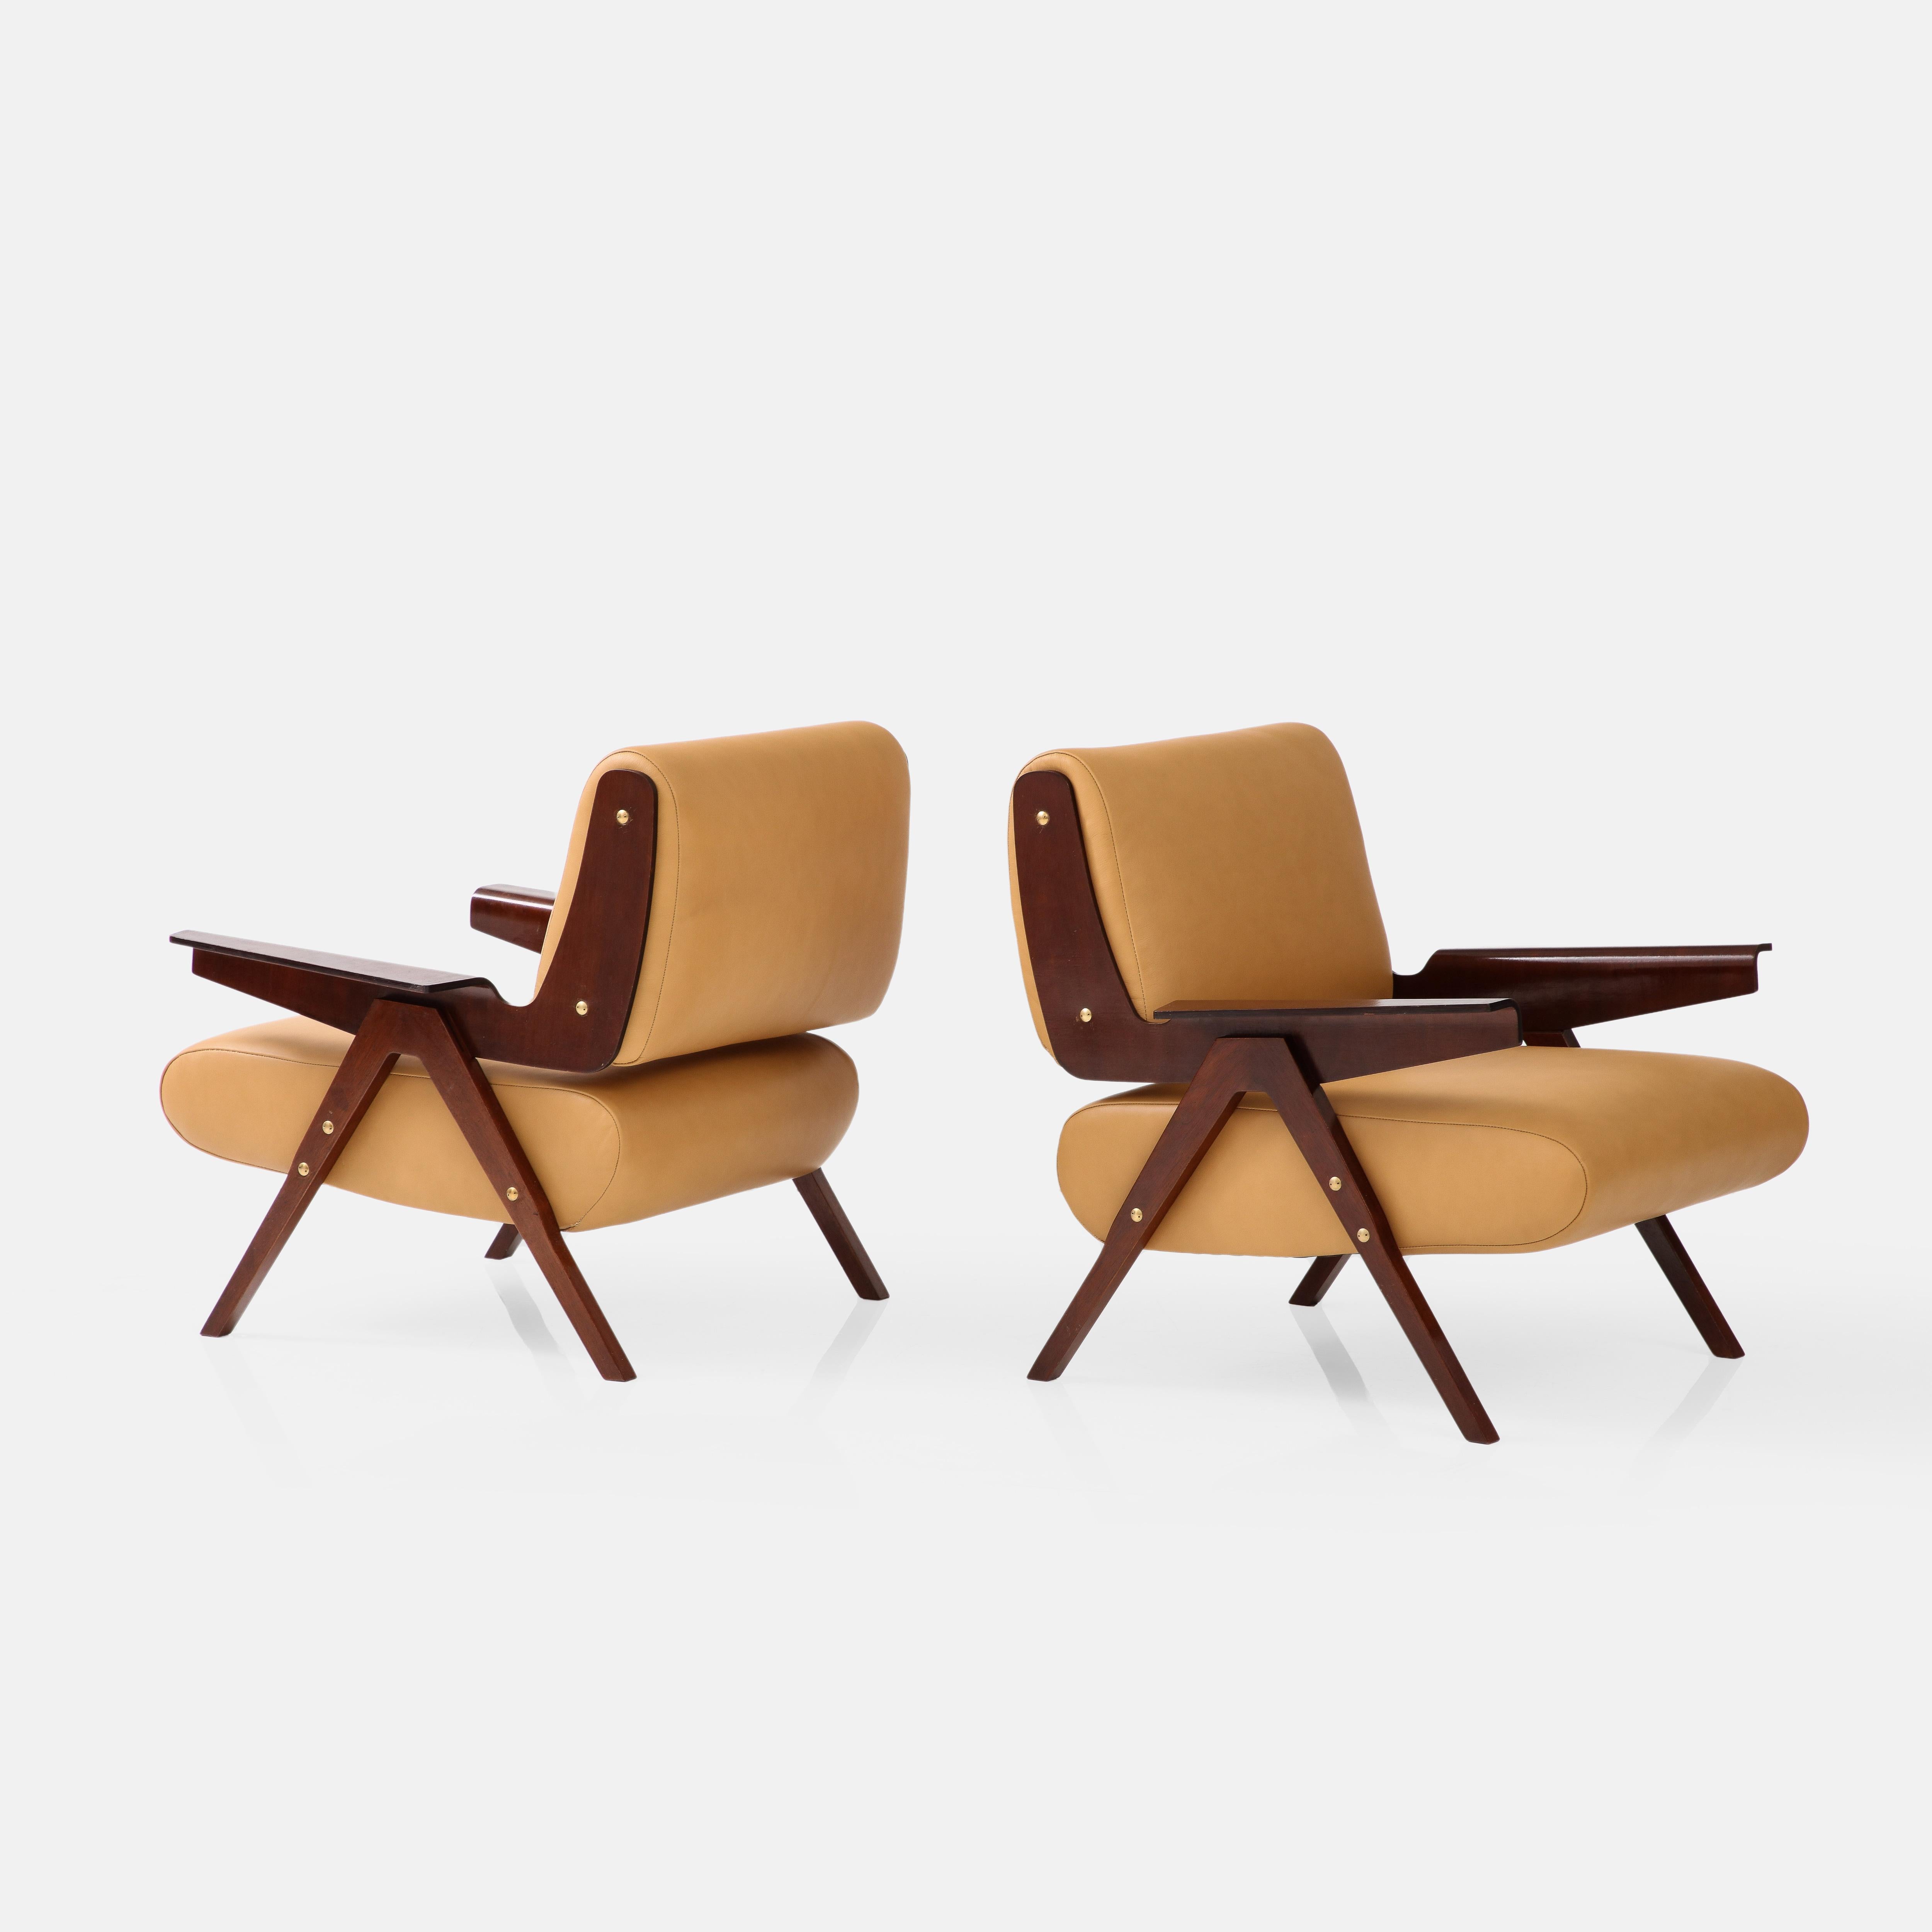 Gianfranco Frattini for Cassina Rare Pair of Mahogany Lounge Chairs Model 831 In Good Condition For Sale In New York, NY